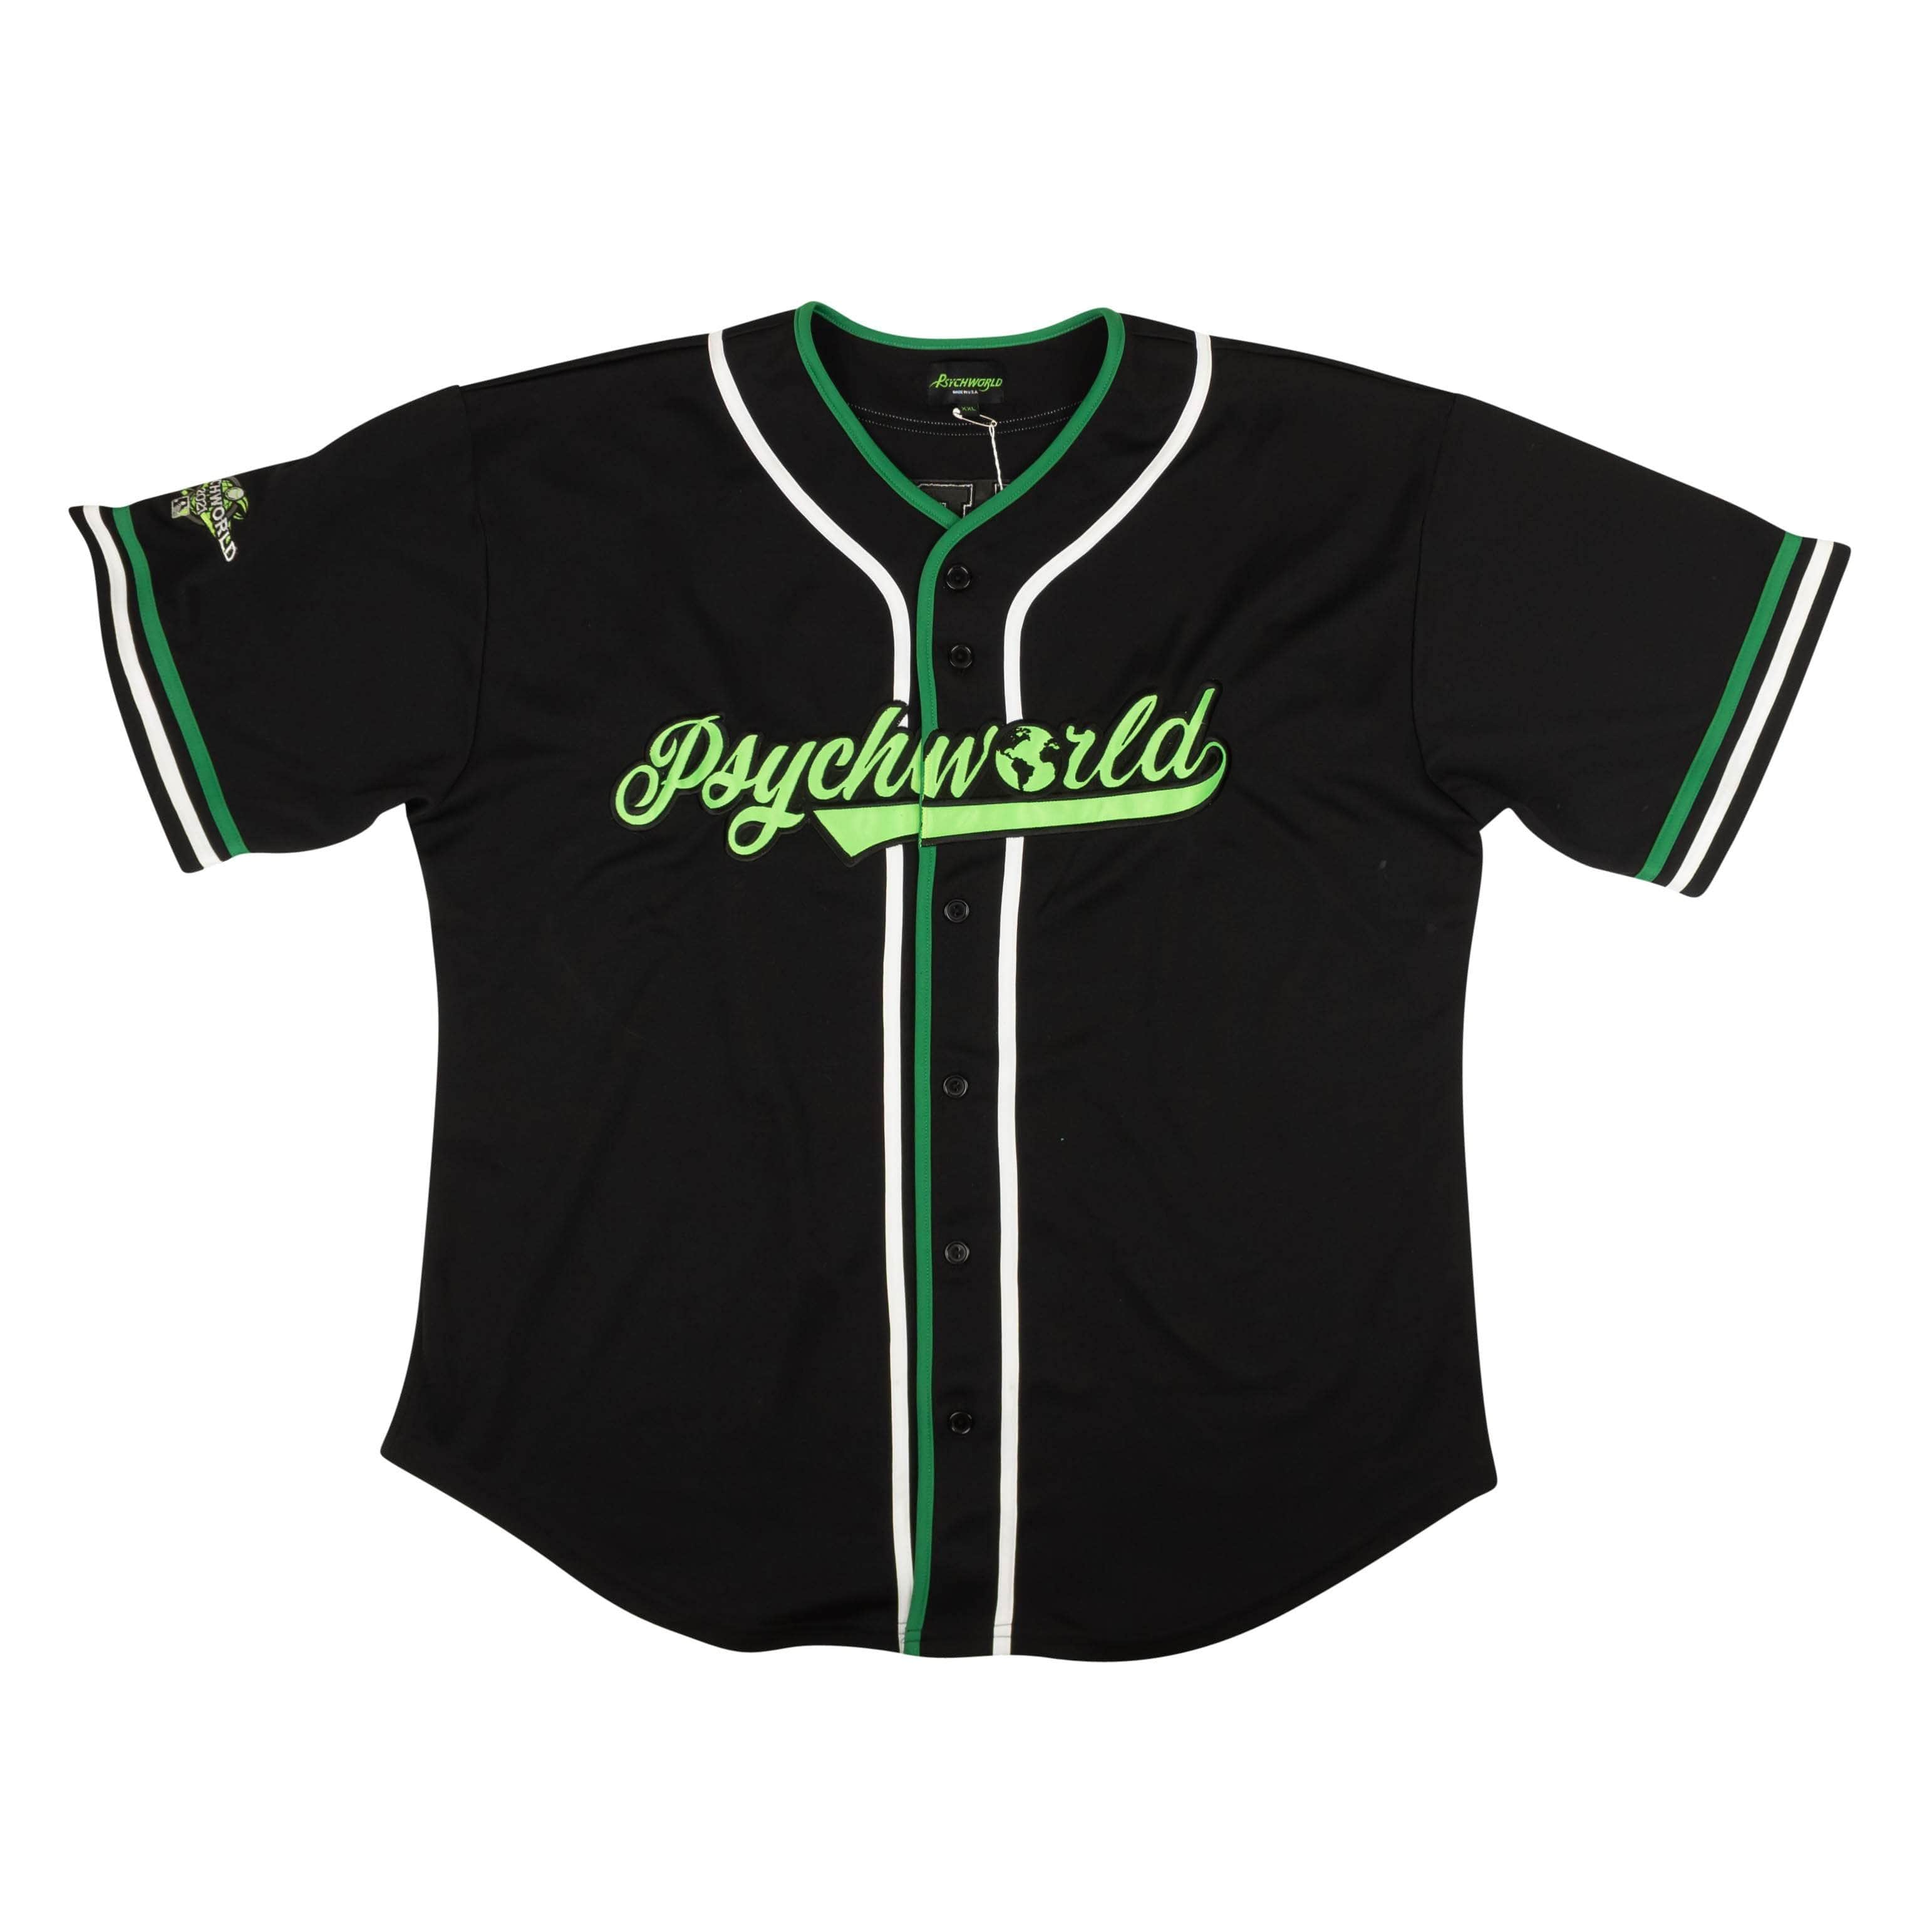 Psychworld channelenable-all, chicmi, couponcollection, gender-mens, main-clothing, mens-shoes, MixedApparel, psychworld, SPO, under-250 XL / Baseall_Shirt_Black/Green 95-PSY-1079/S Baseball_Shirt_Black/Green Black/Green PSYCHWORLD Baseball Shirt 95-PSY-1079/XL 95-PSY-1079/XL